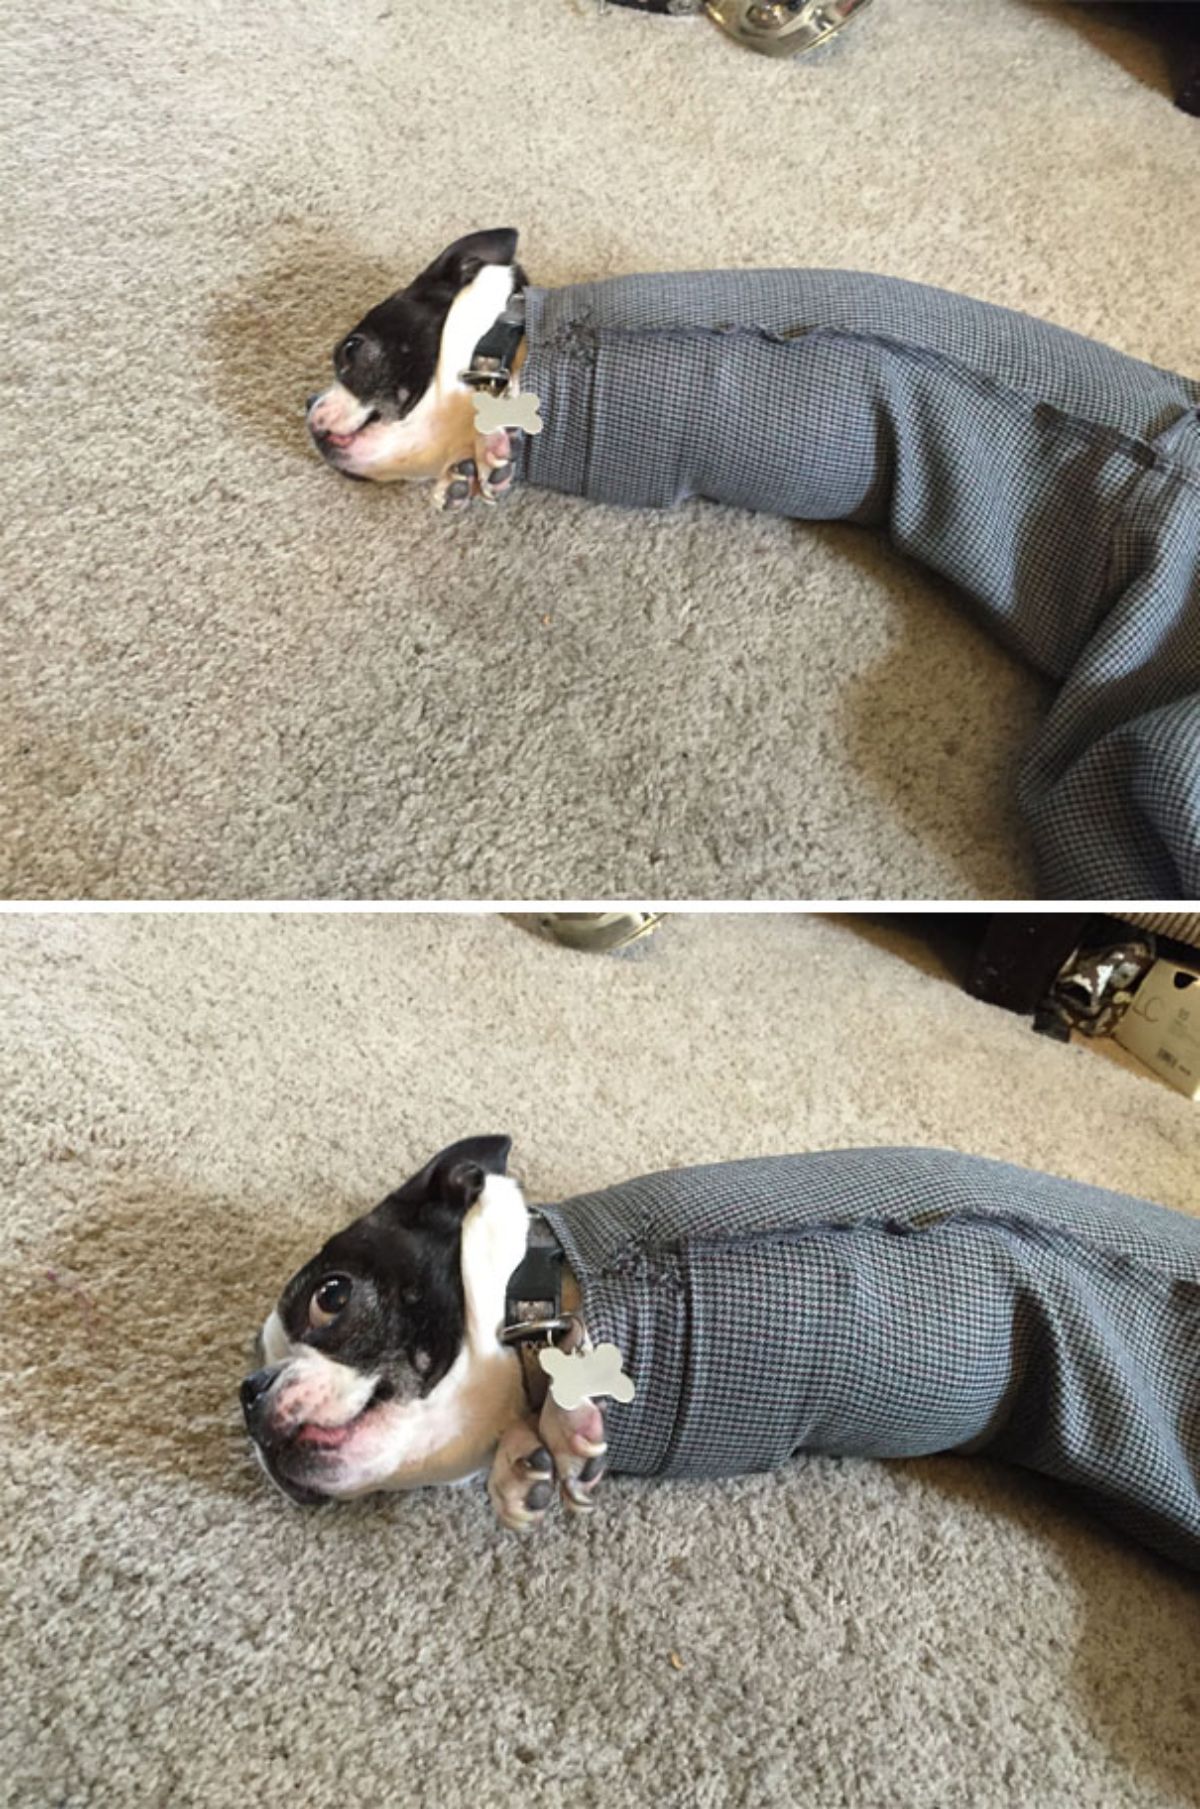 2 photos of a black and white french bulldog laying on carpet stucki inside the arm of a coat with the dog's front paws sticking out under the chin